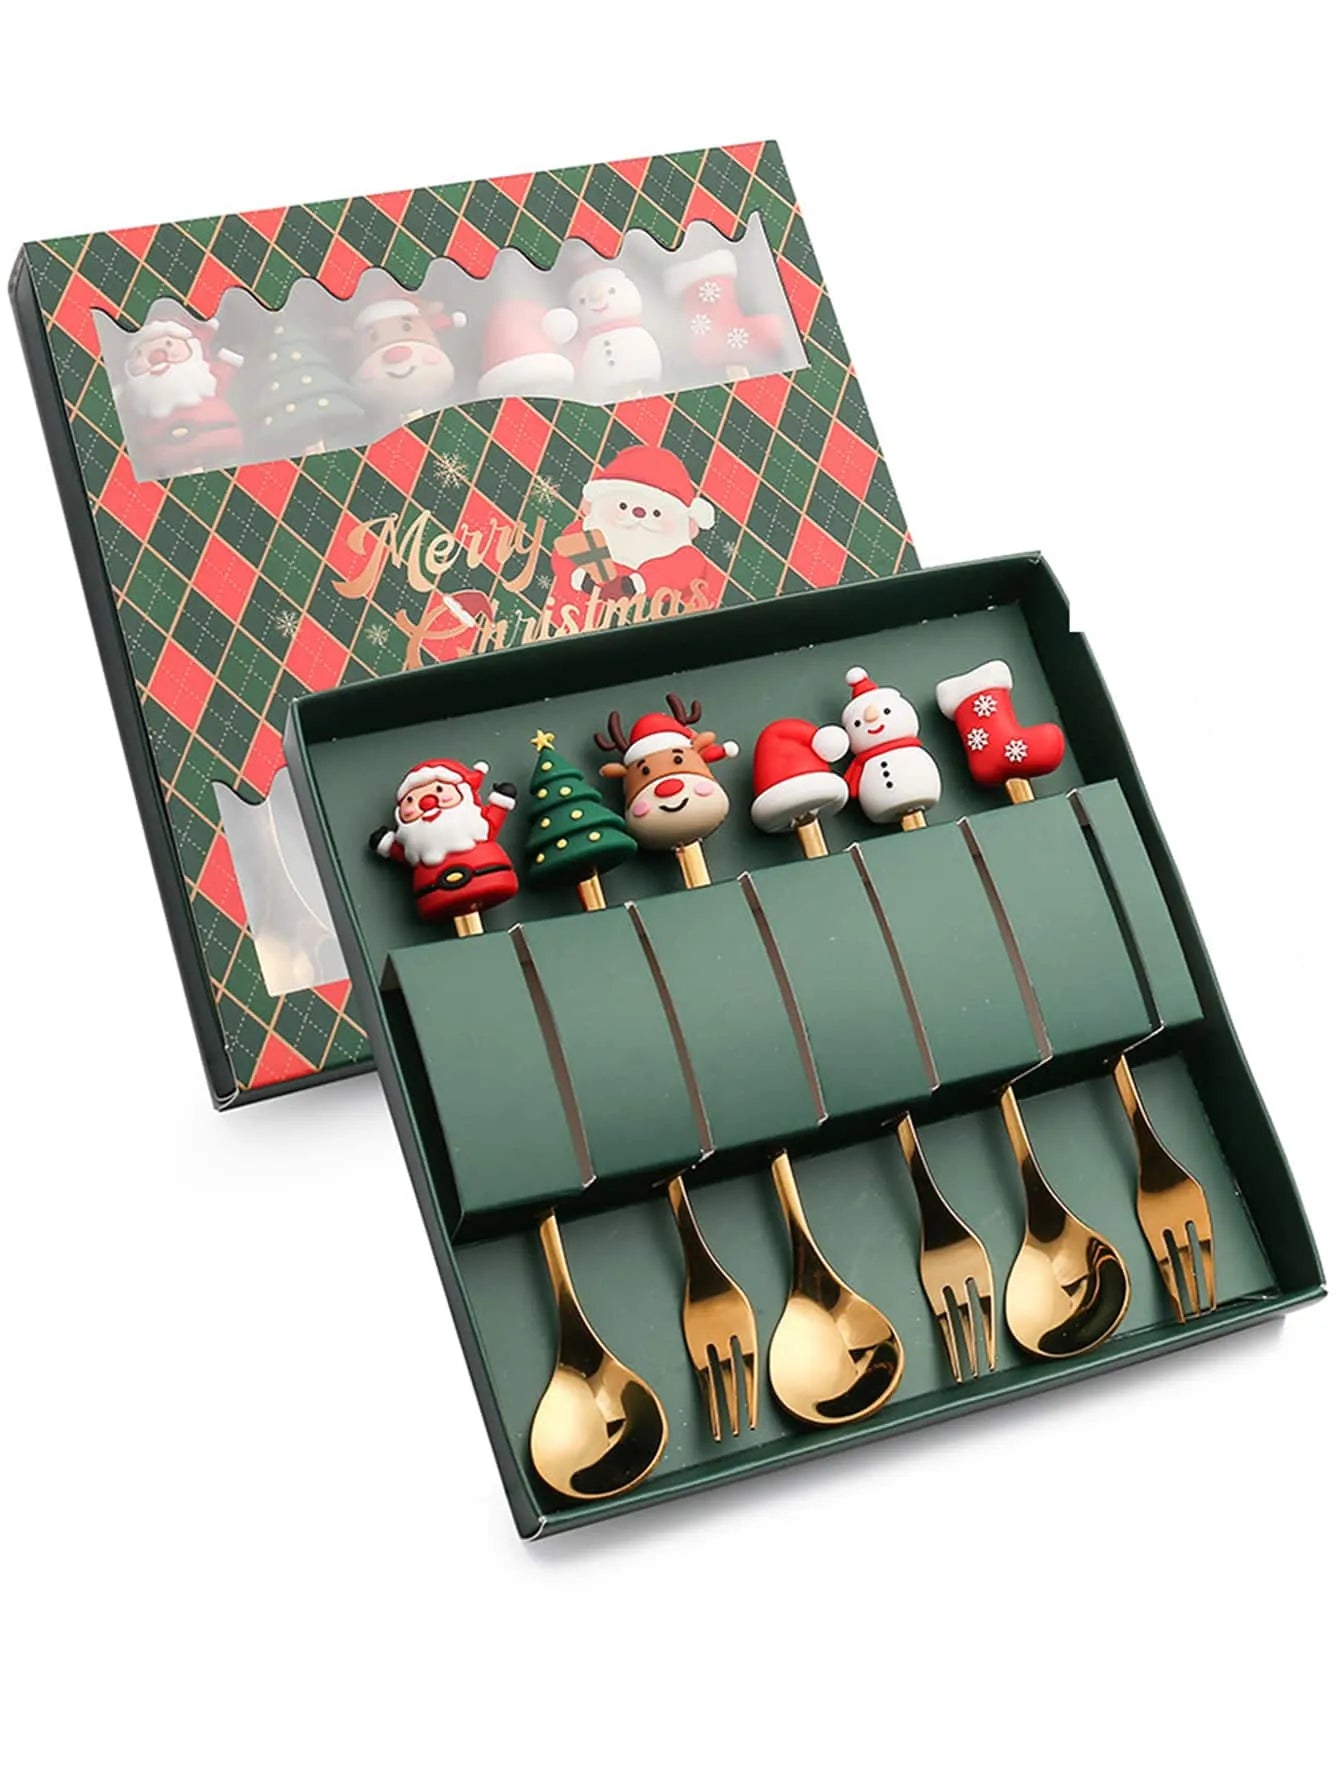 Christmas Themed Stainless Steel Spoon & Fork Set